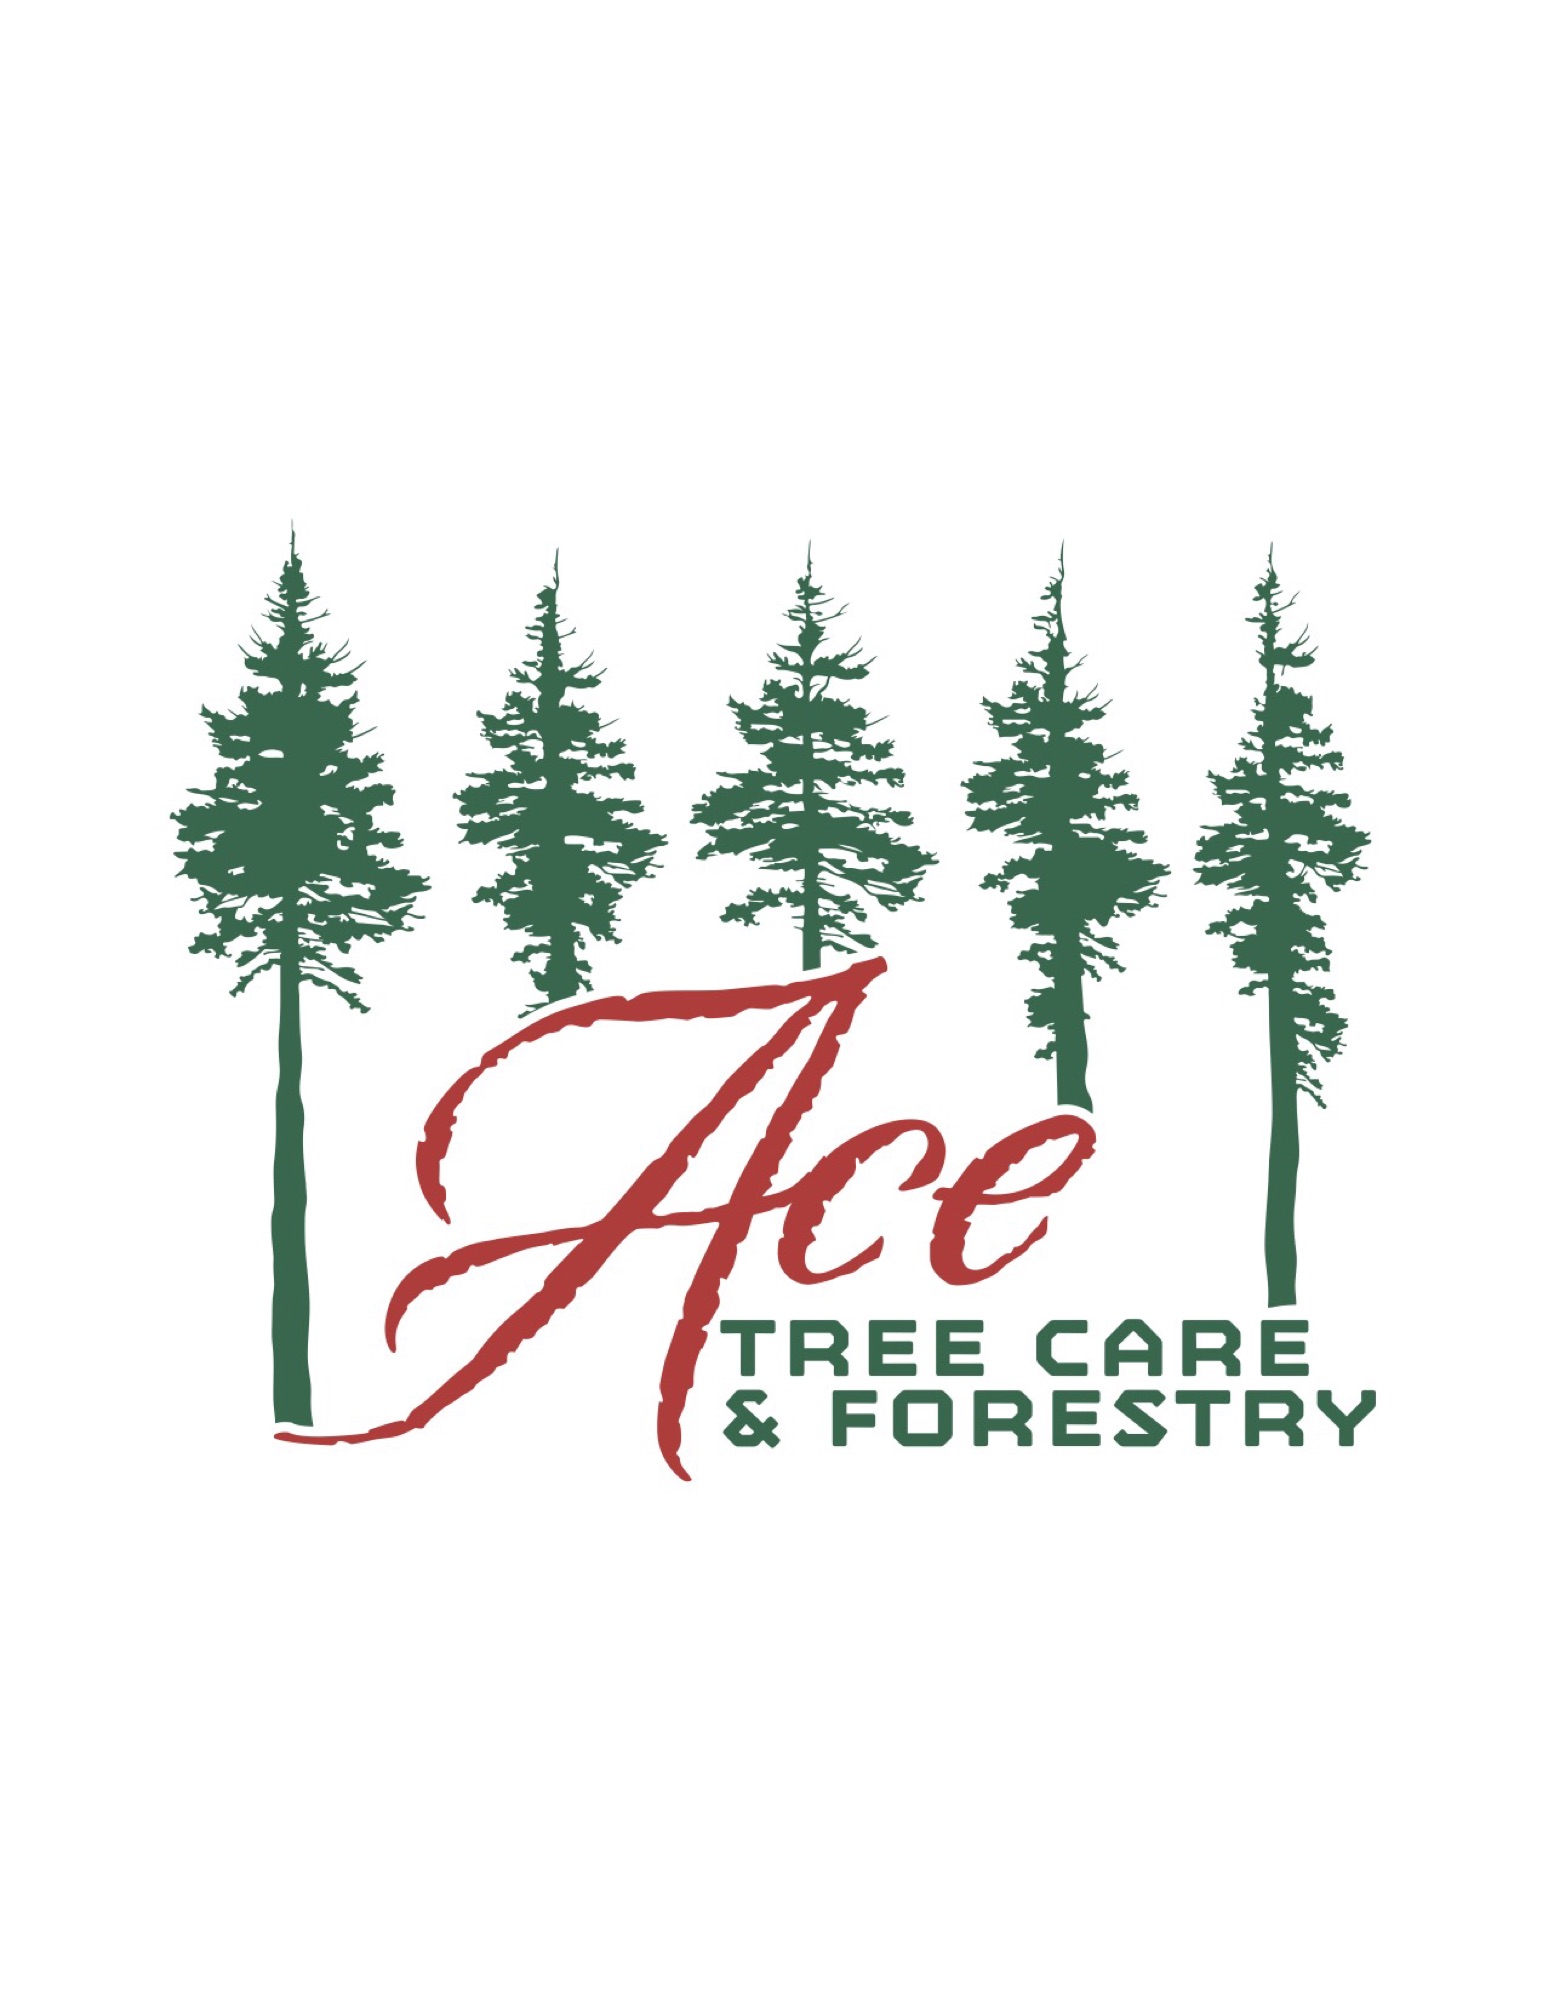 Ace Tree Care and Forestry Logo